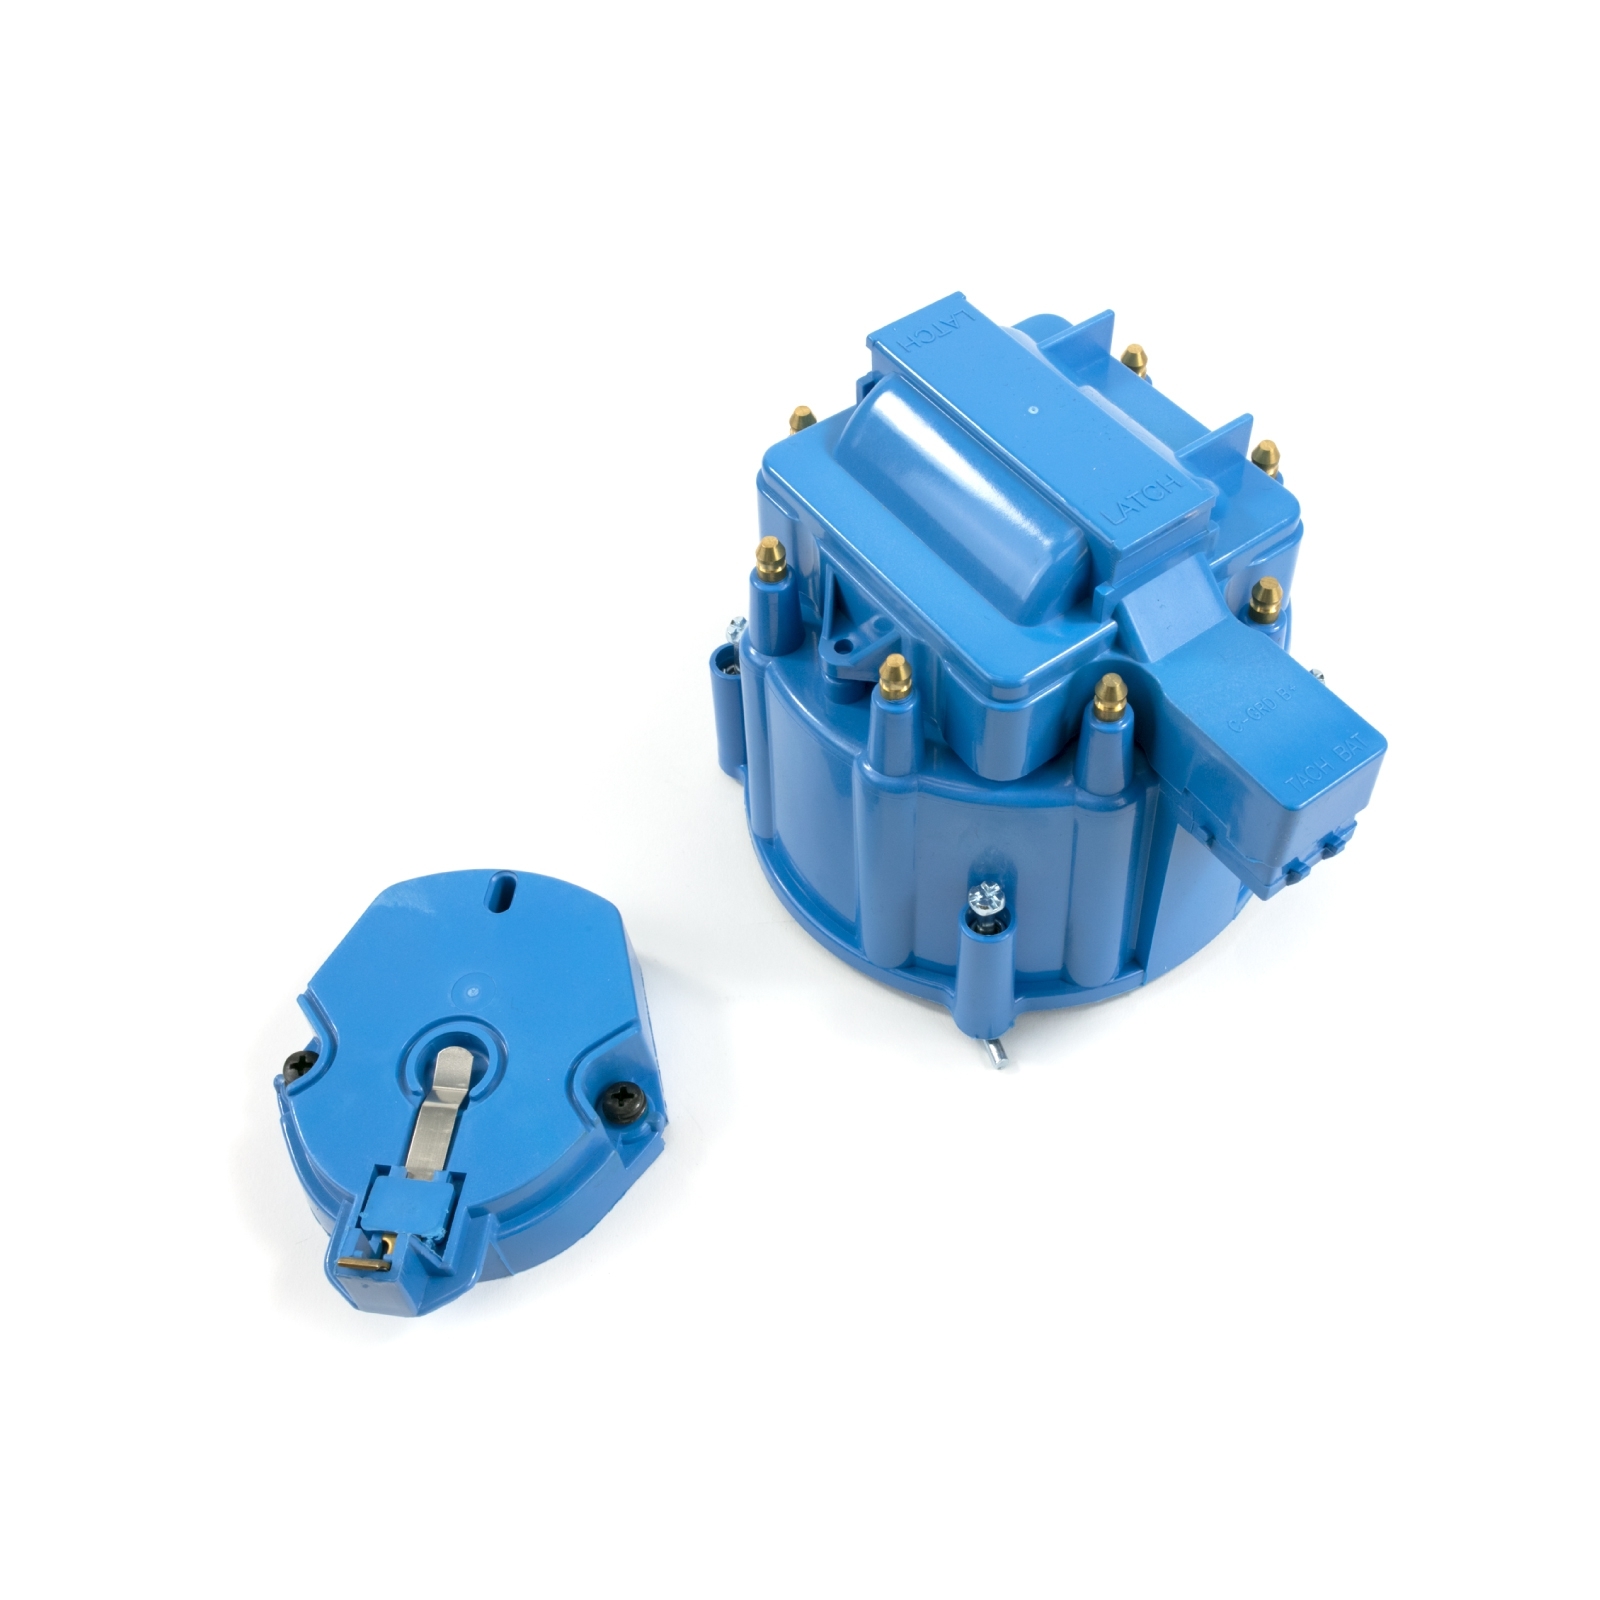 Blue HEI Distributor Cap and Coil Cover